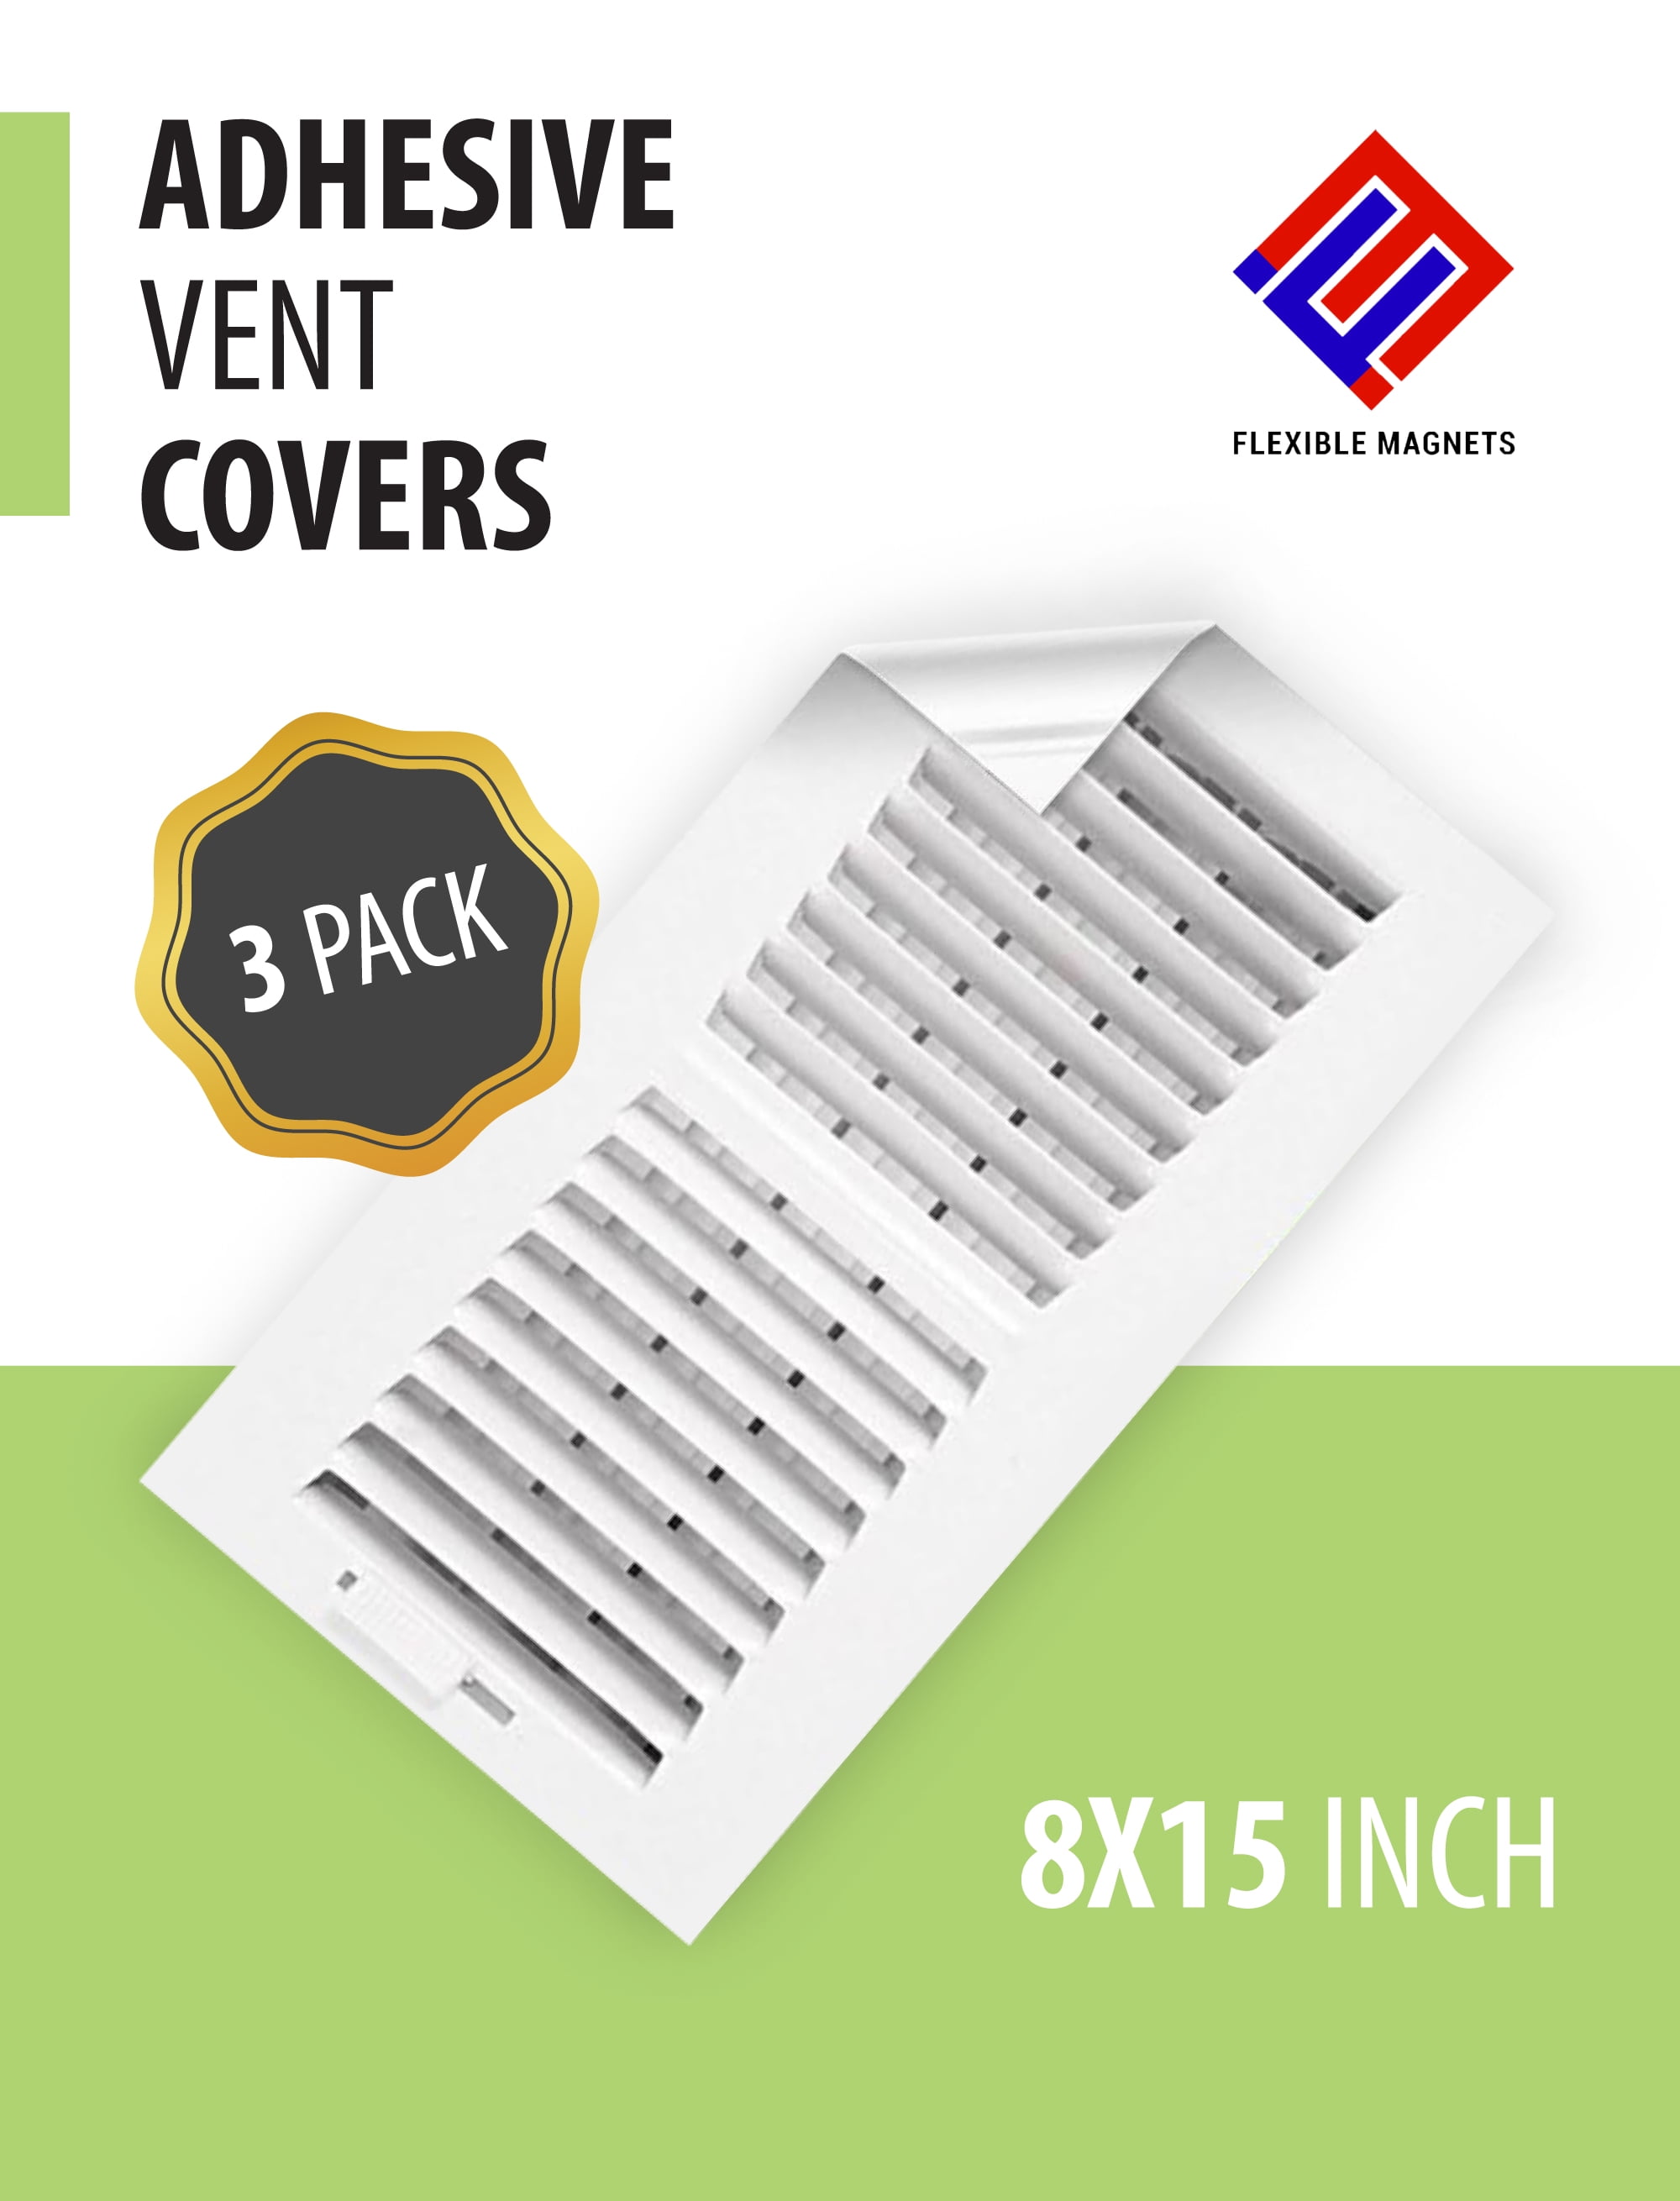 4 Pack FAMKIT Strong Magnetic Vent Covers for Ceiling and Wall Vents Compatible with All Matierials for Floor,Wall,Ceiling